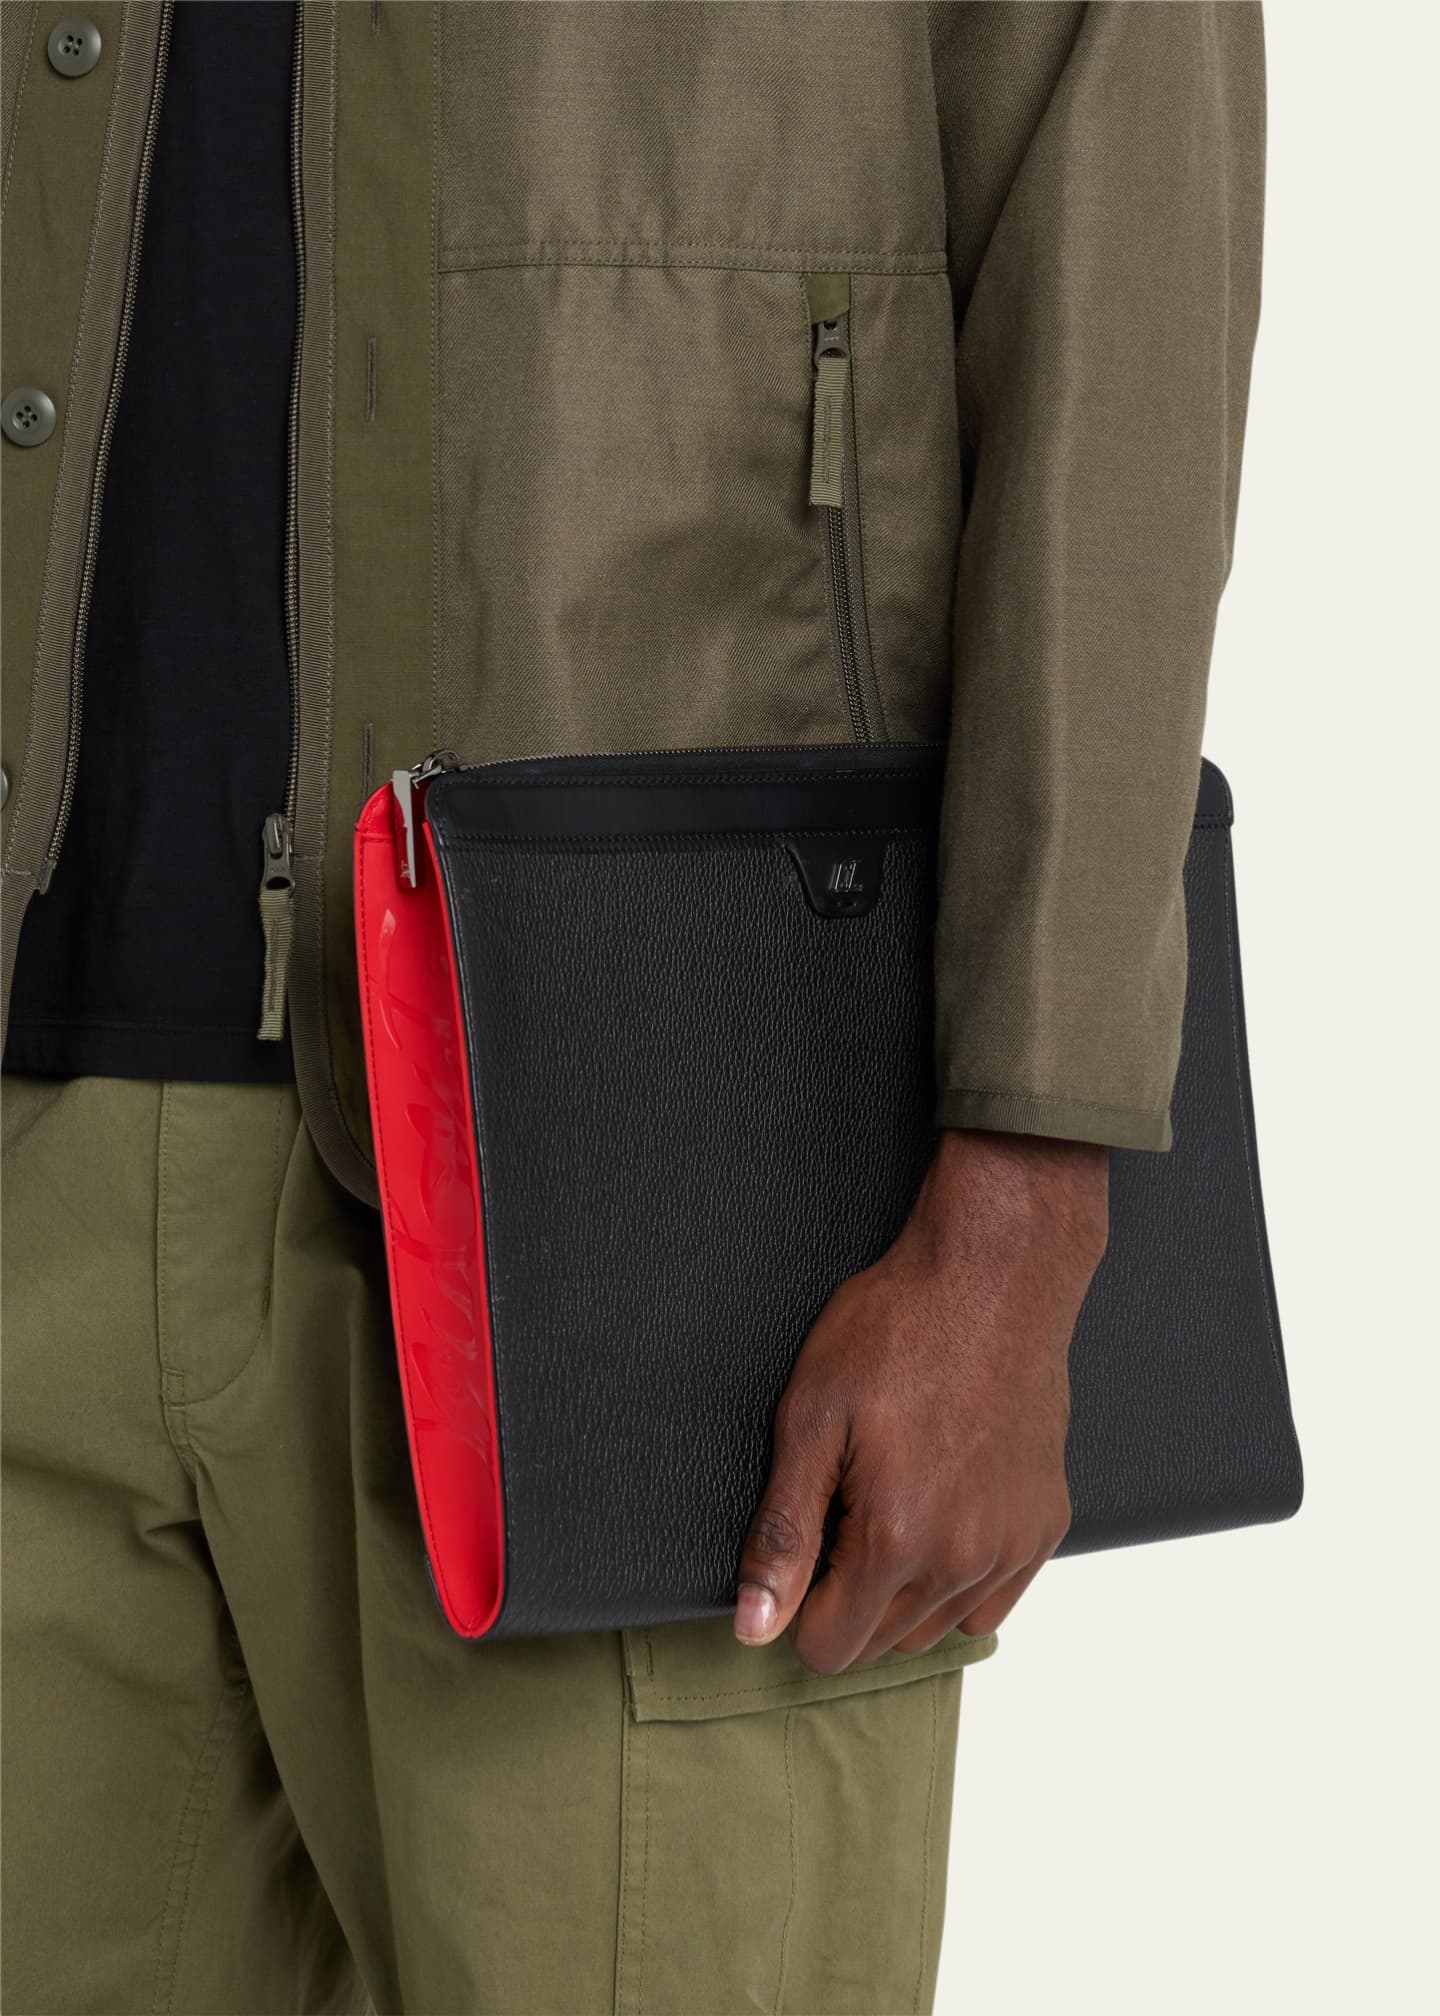 Christian Louboutin for Rui Leather Pouch